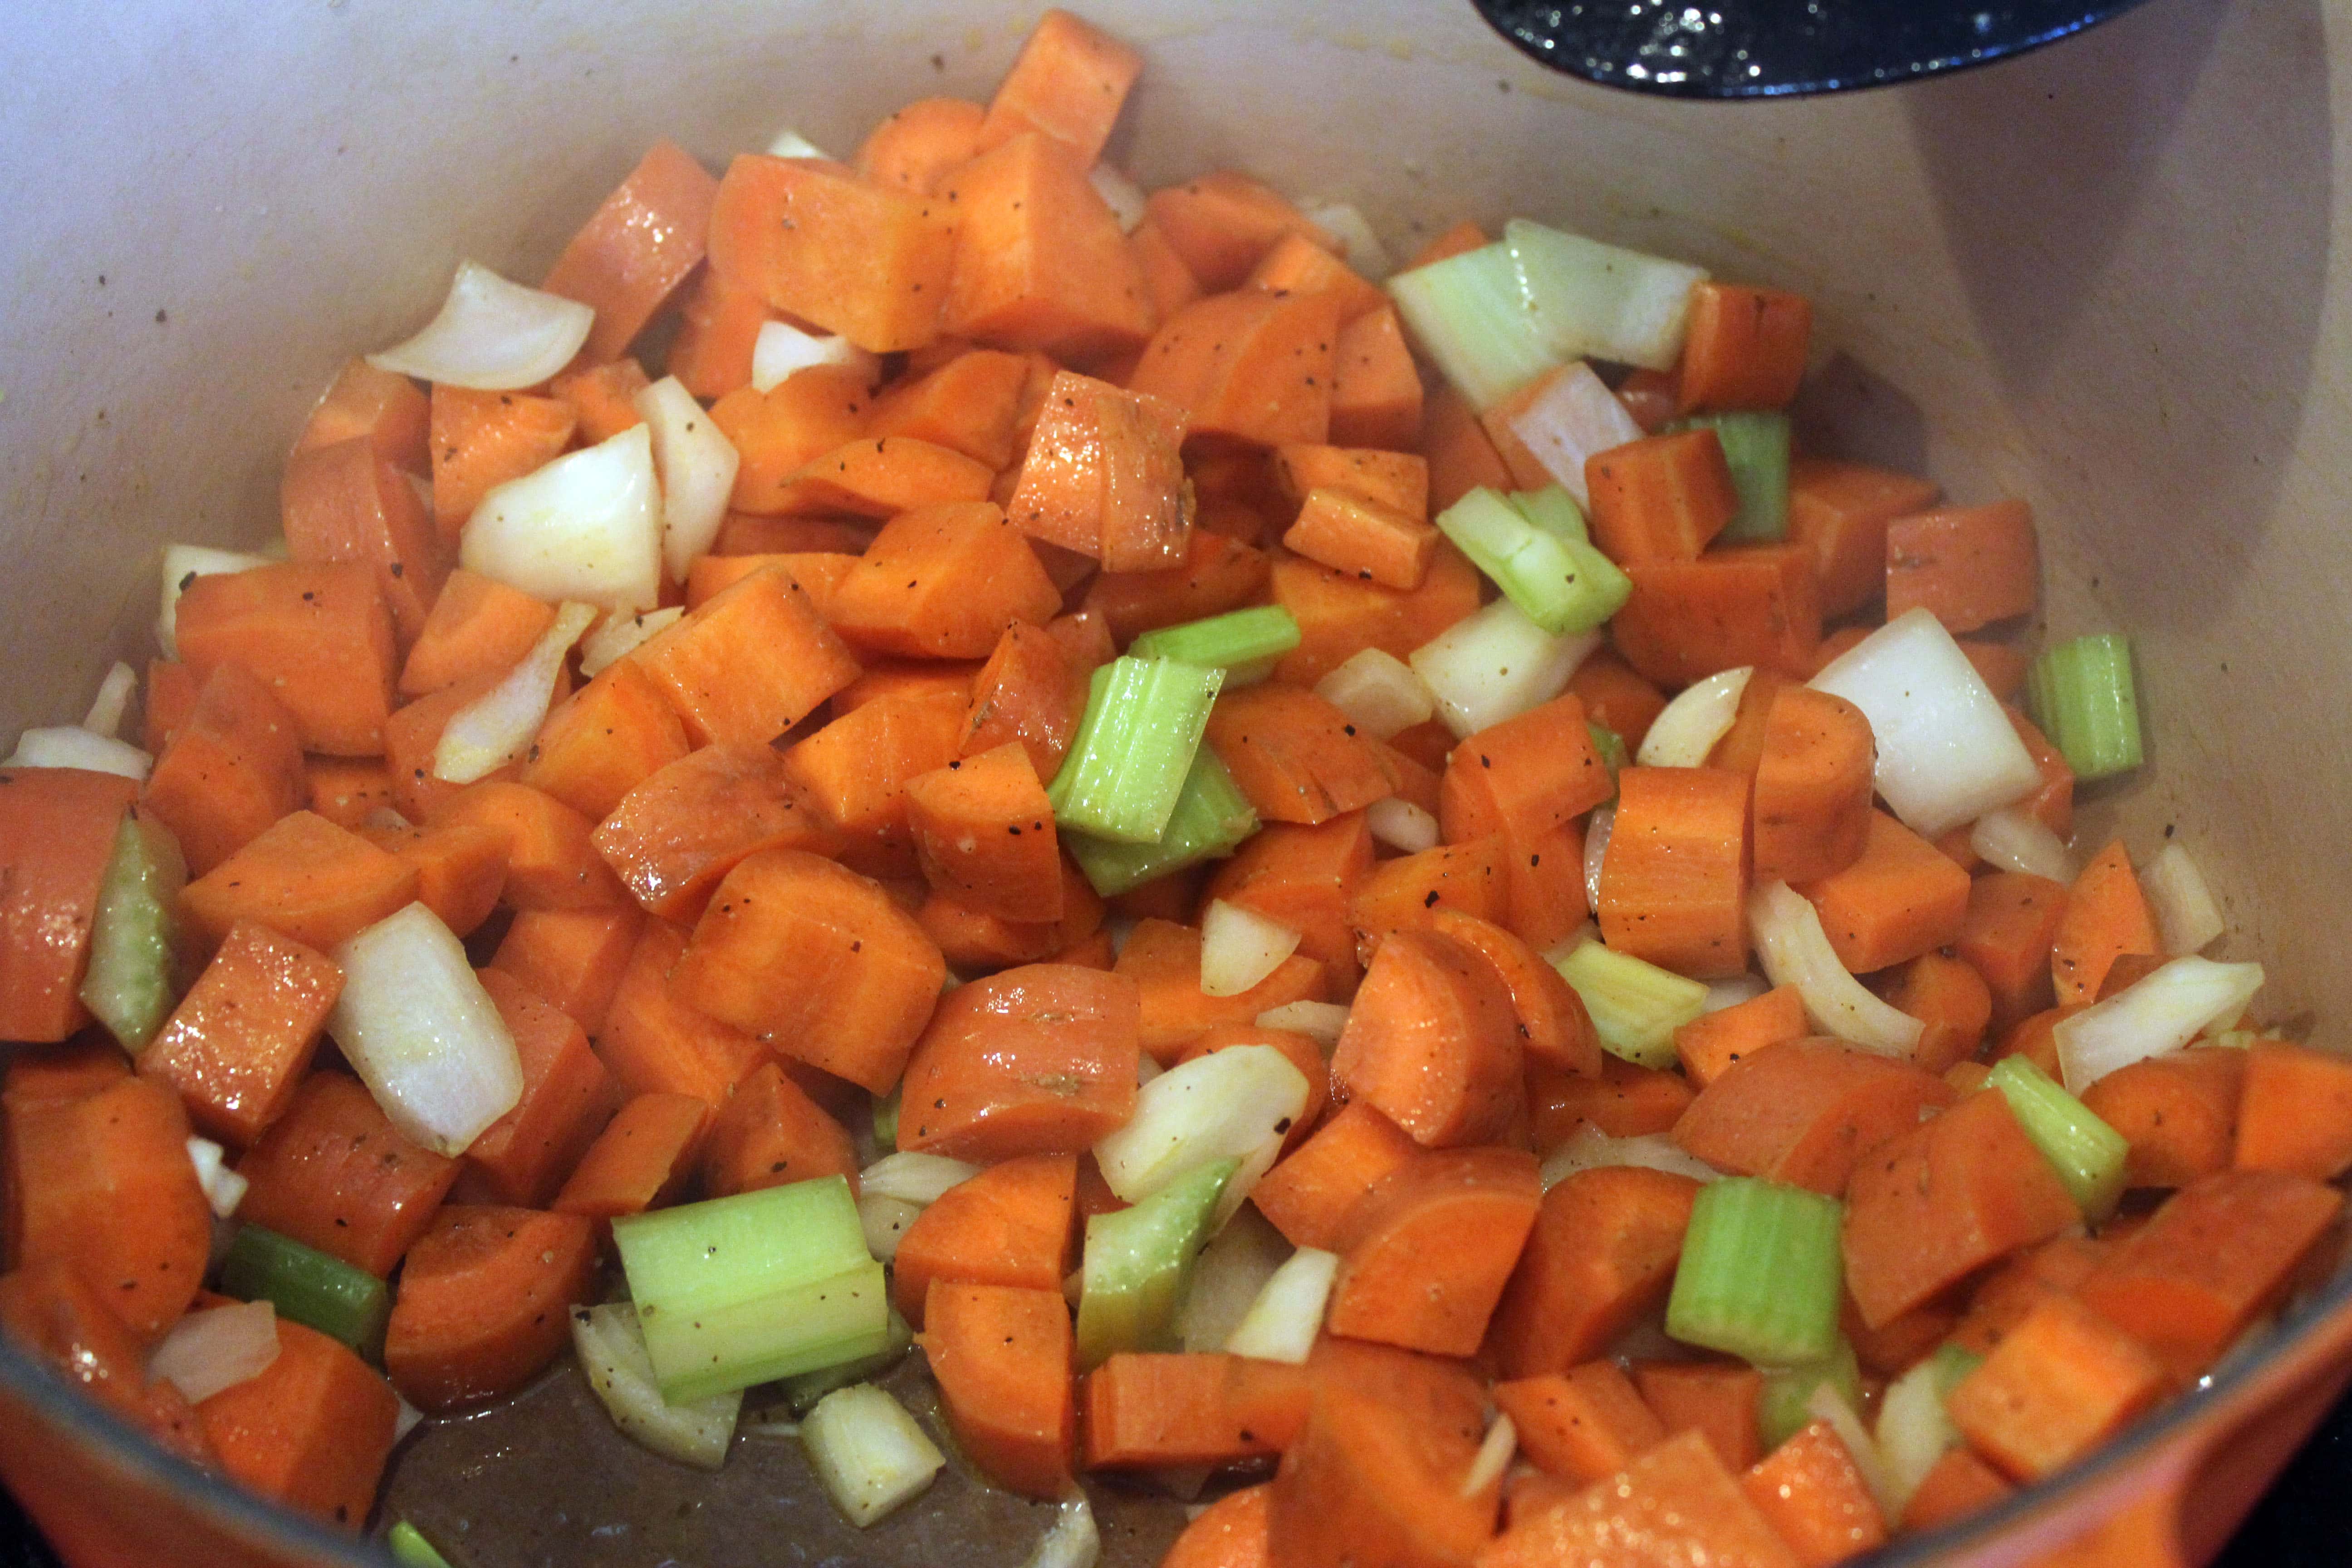 Add other veggies to carrots